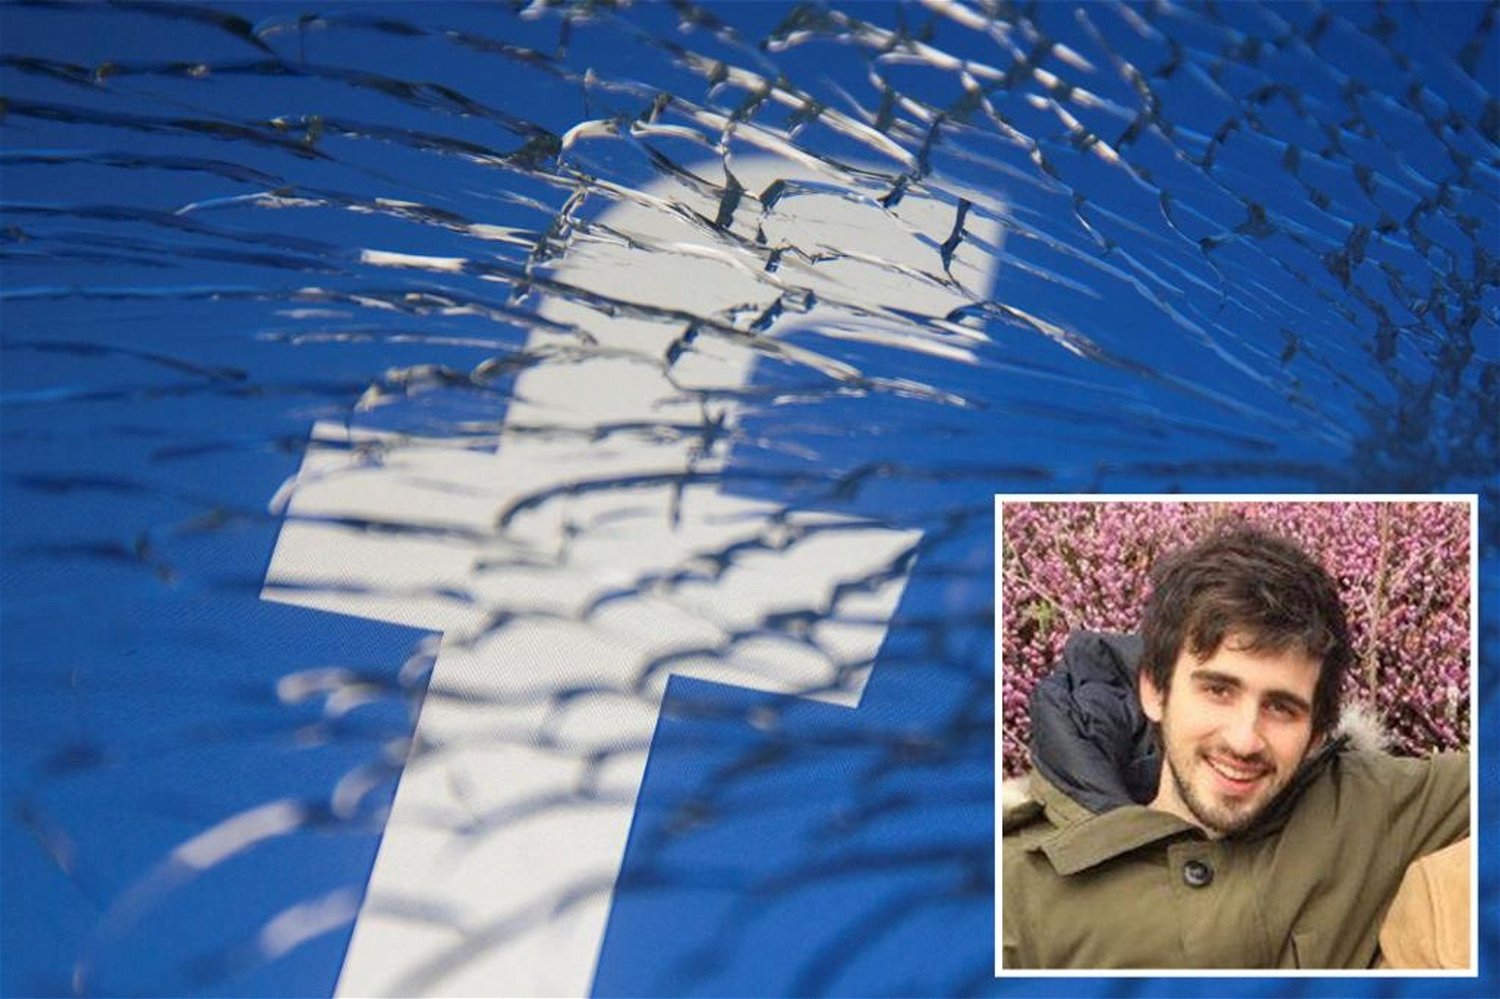 Facebook banned developer who made an app to let users limit news feed